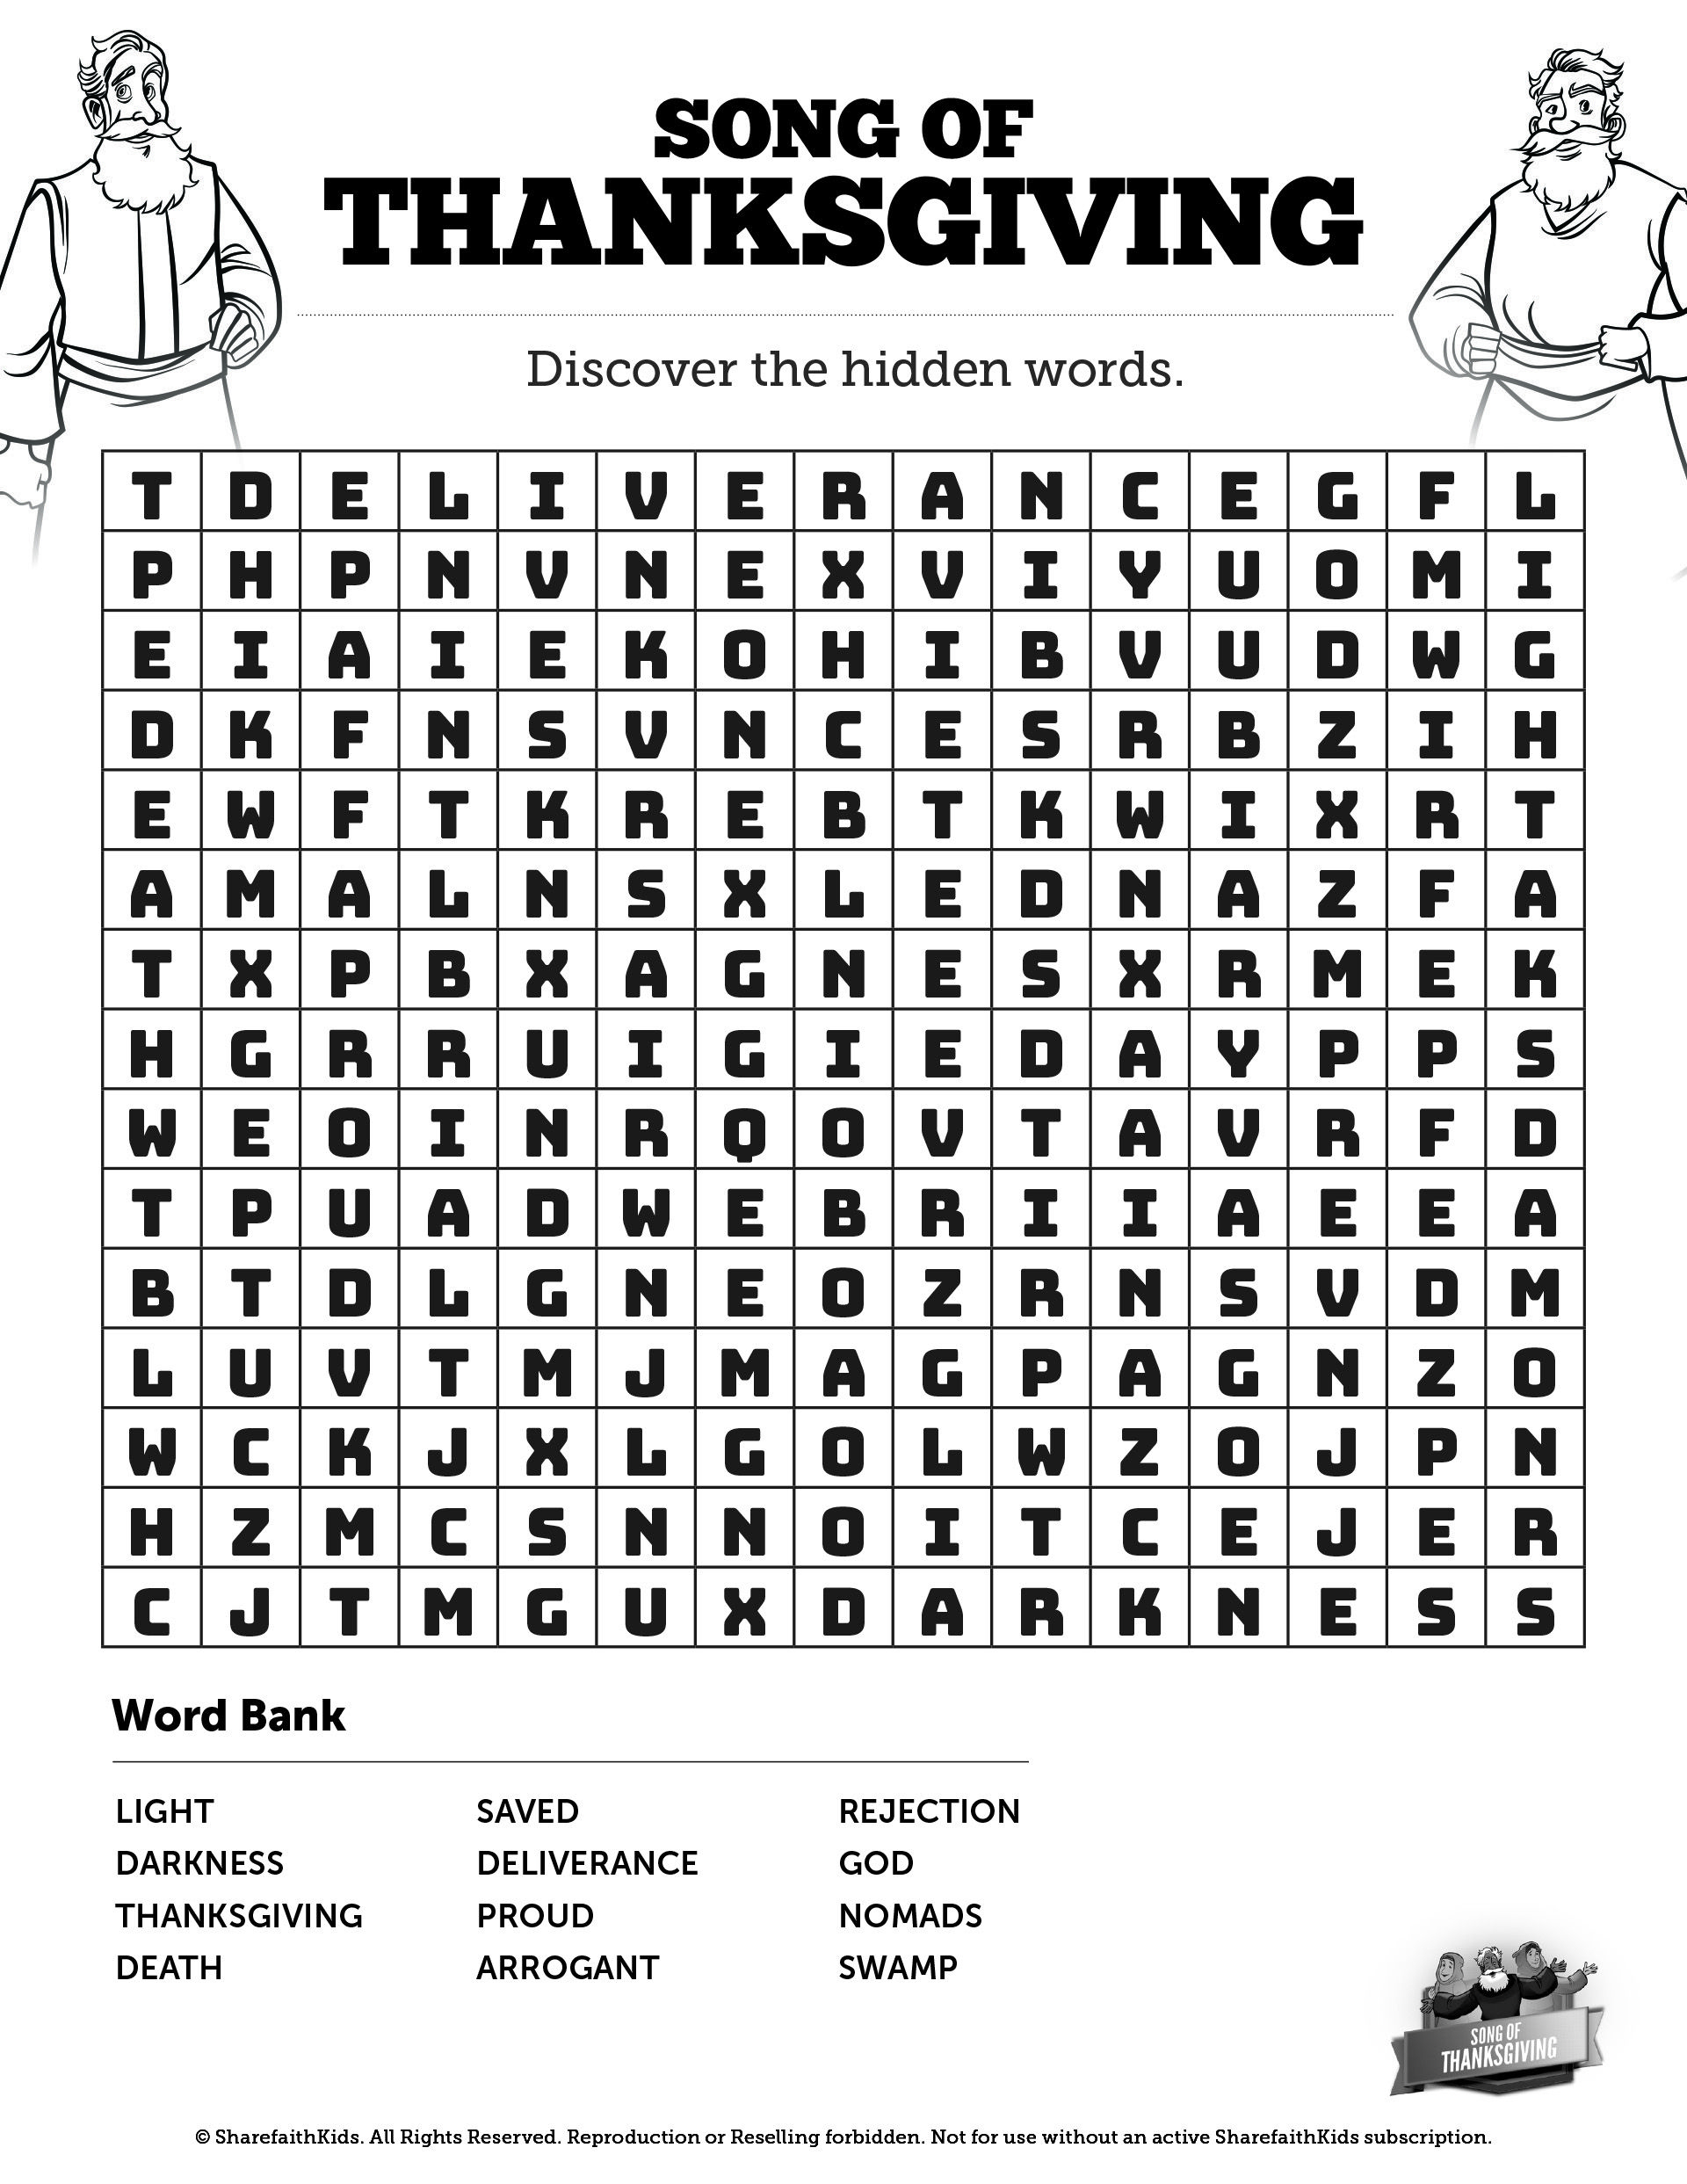 Psalm 107 Song Of Thanksgiving Bible Word Search Puzzles: If